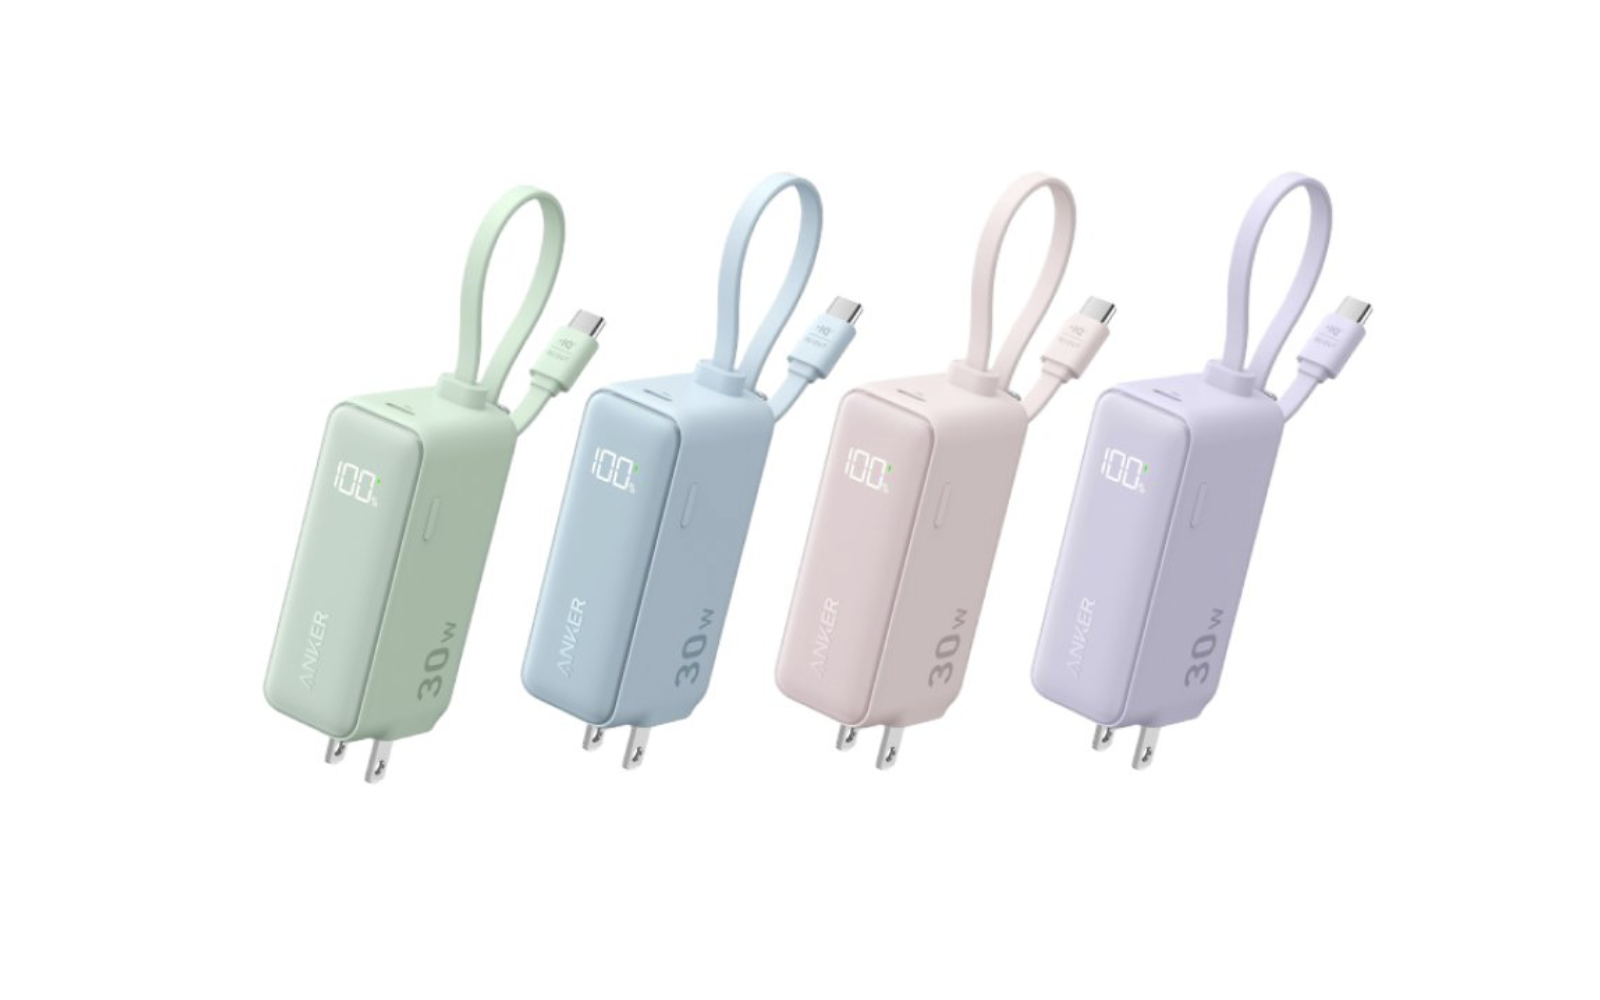 Anker PowerBank 30w fusion new colors